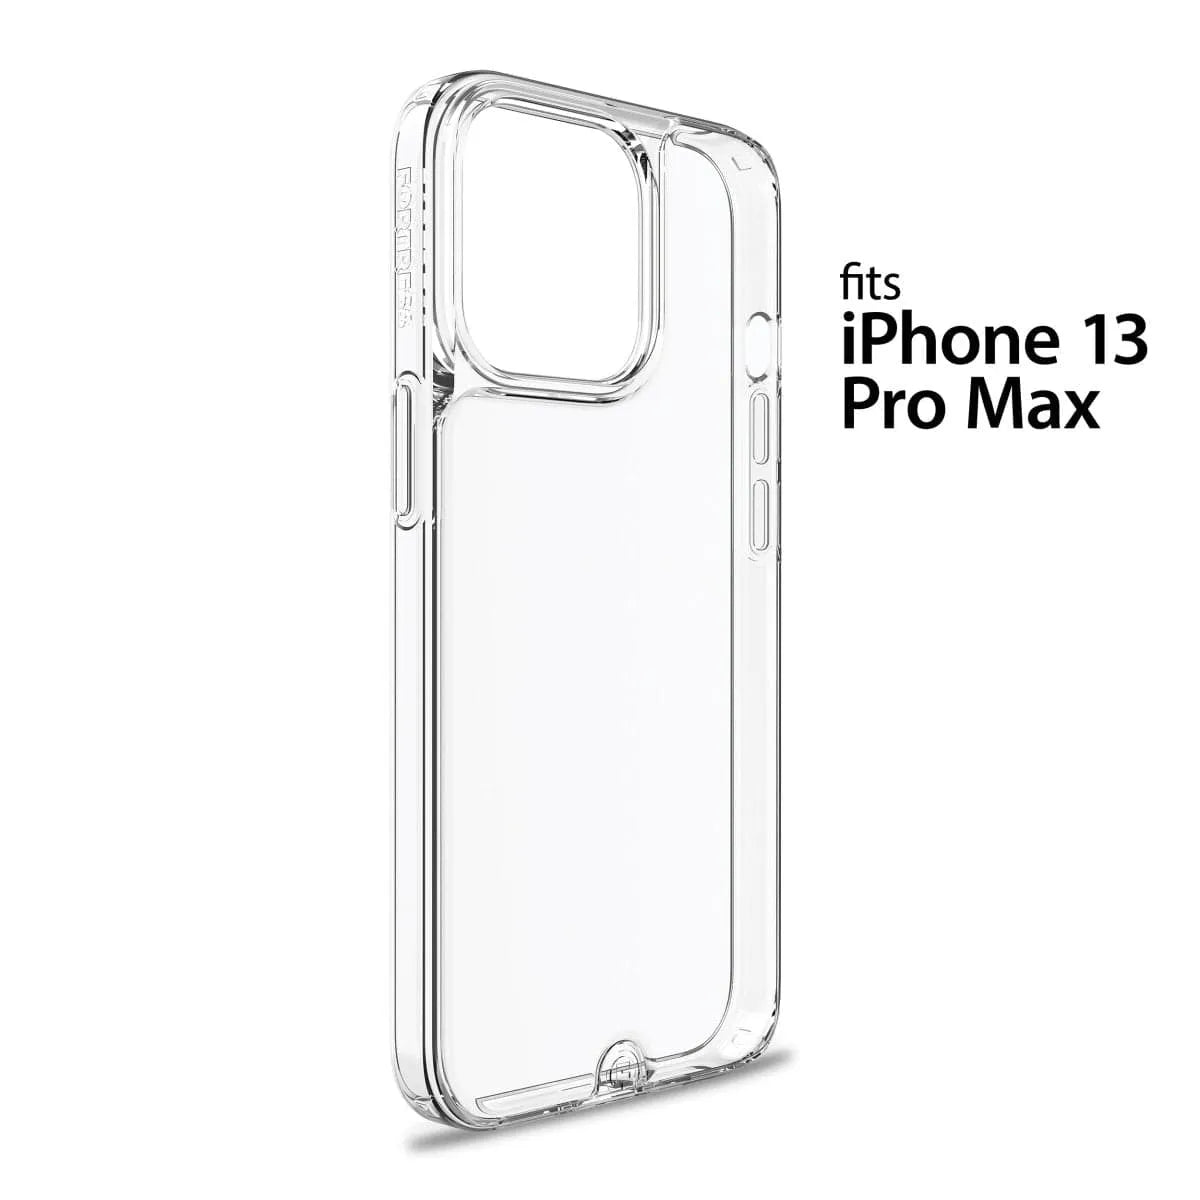 Fortress Fortress Infinite Glass Case for iPhone 13 Pro Max  Scooch Infinite Glass